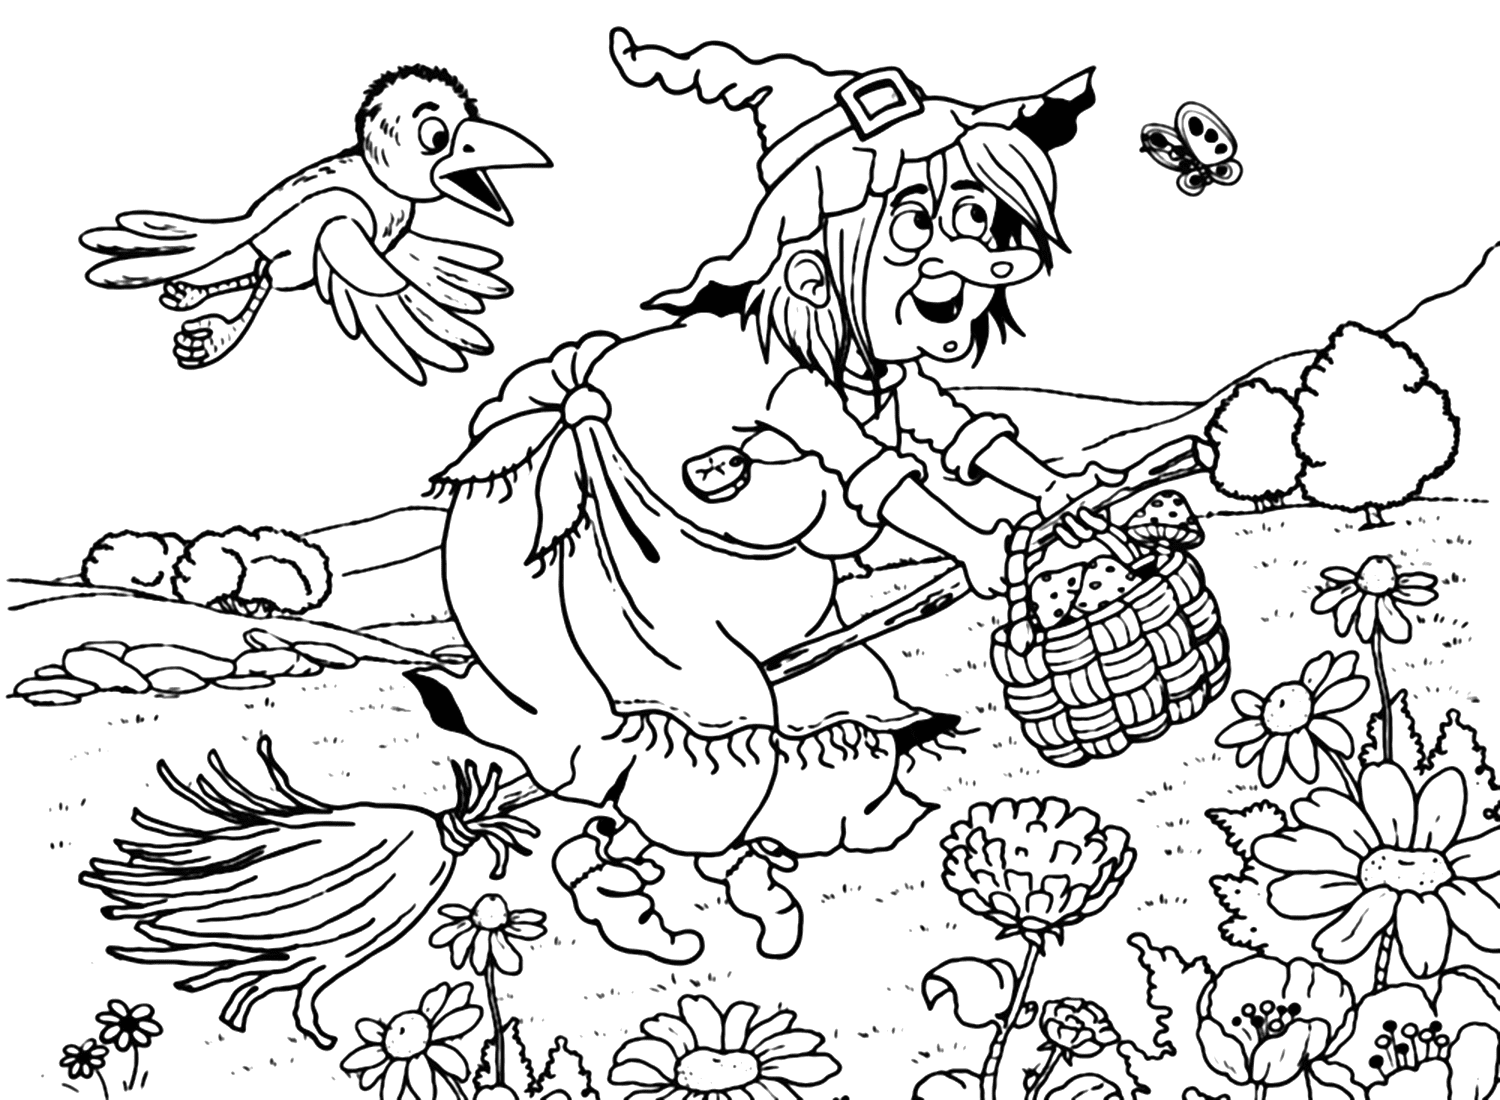 Crow With Witch Coloring Page from Crow